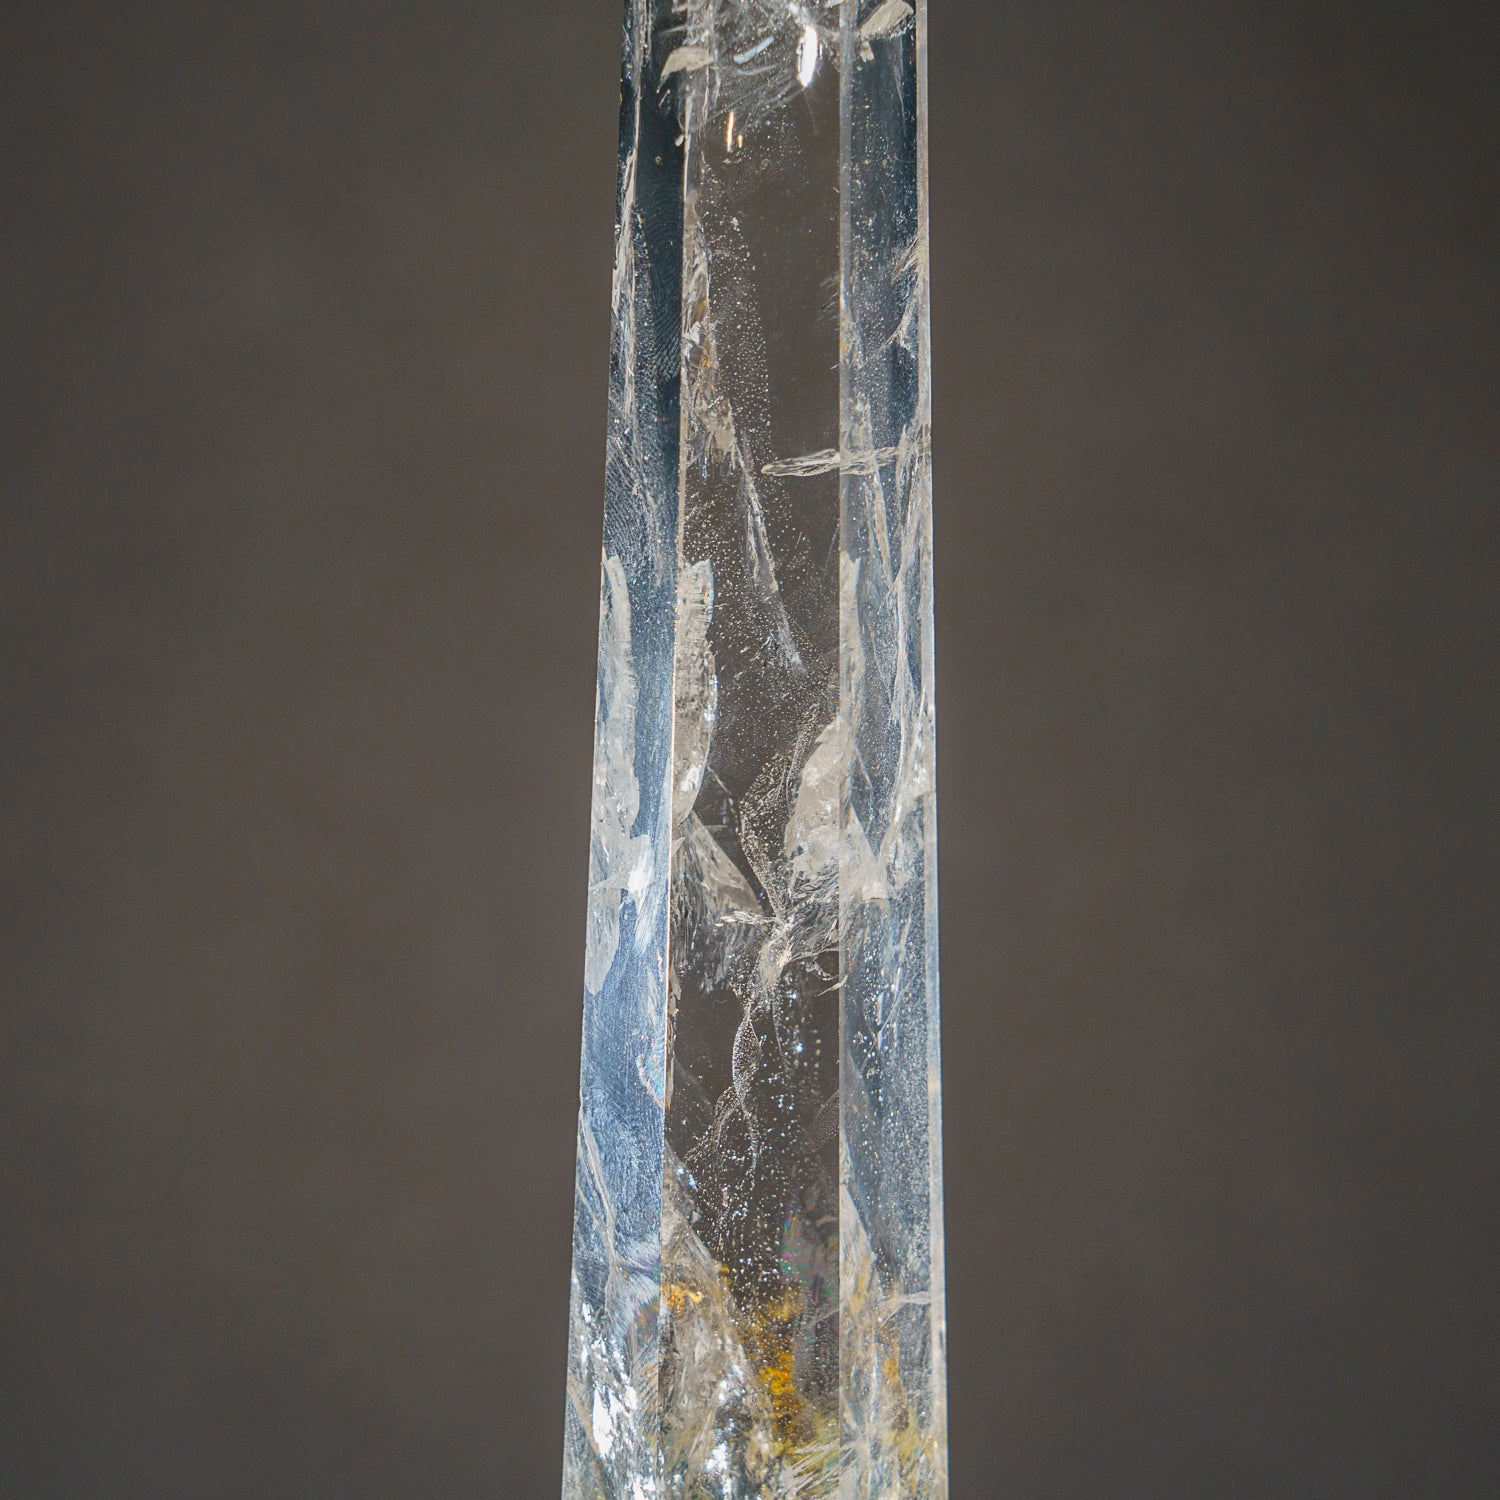 Genuine Polished Clear Quartz Point From Brazil (1 lbs)